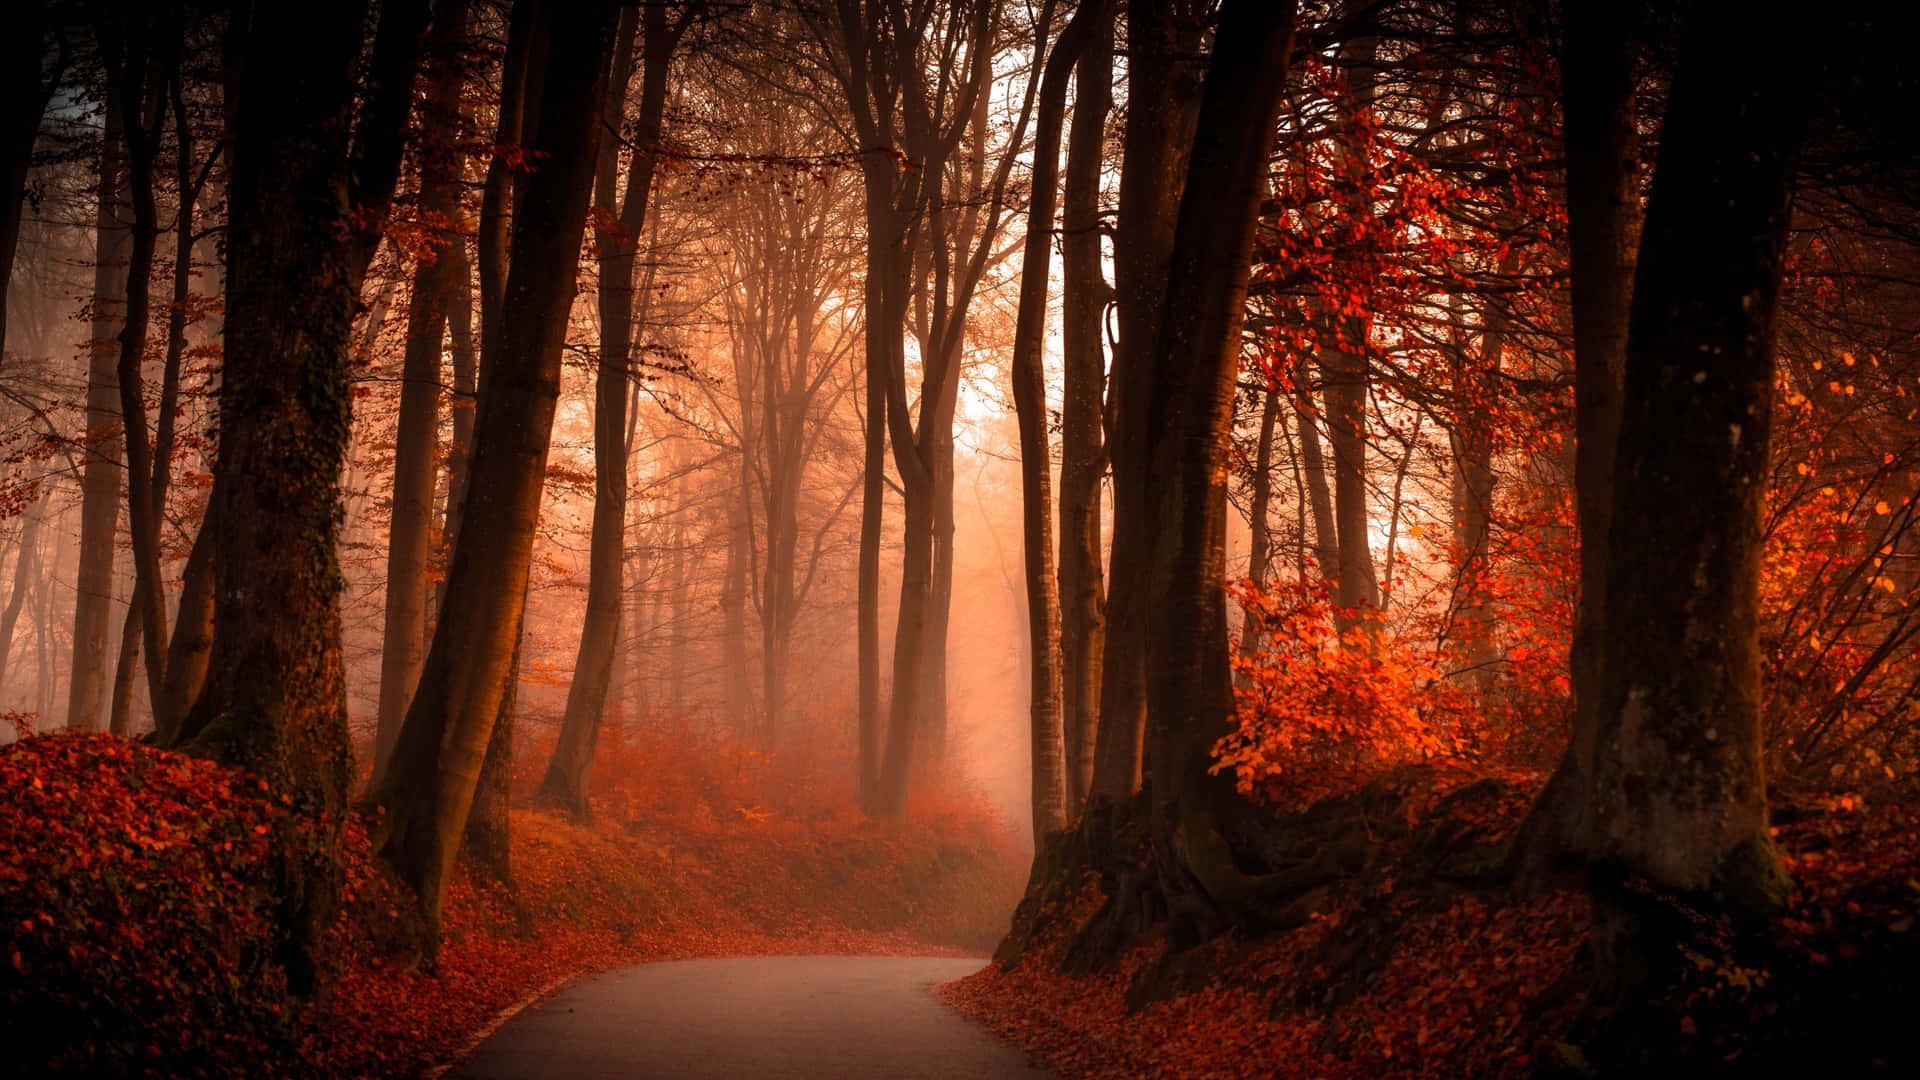 Take a Walk Through the Glowing Red Forest Wallpaper